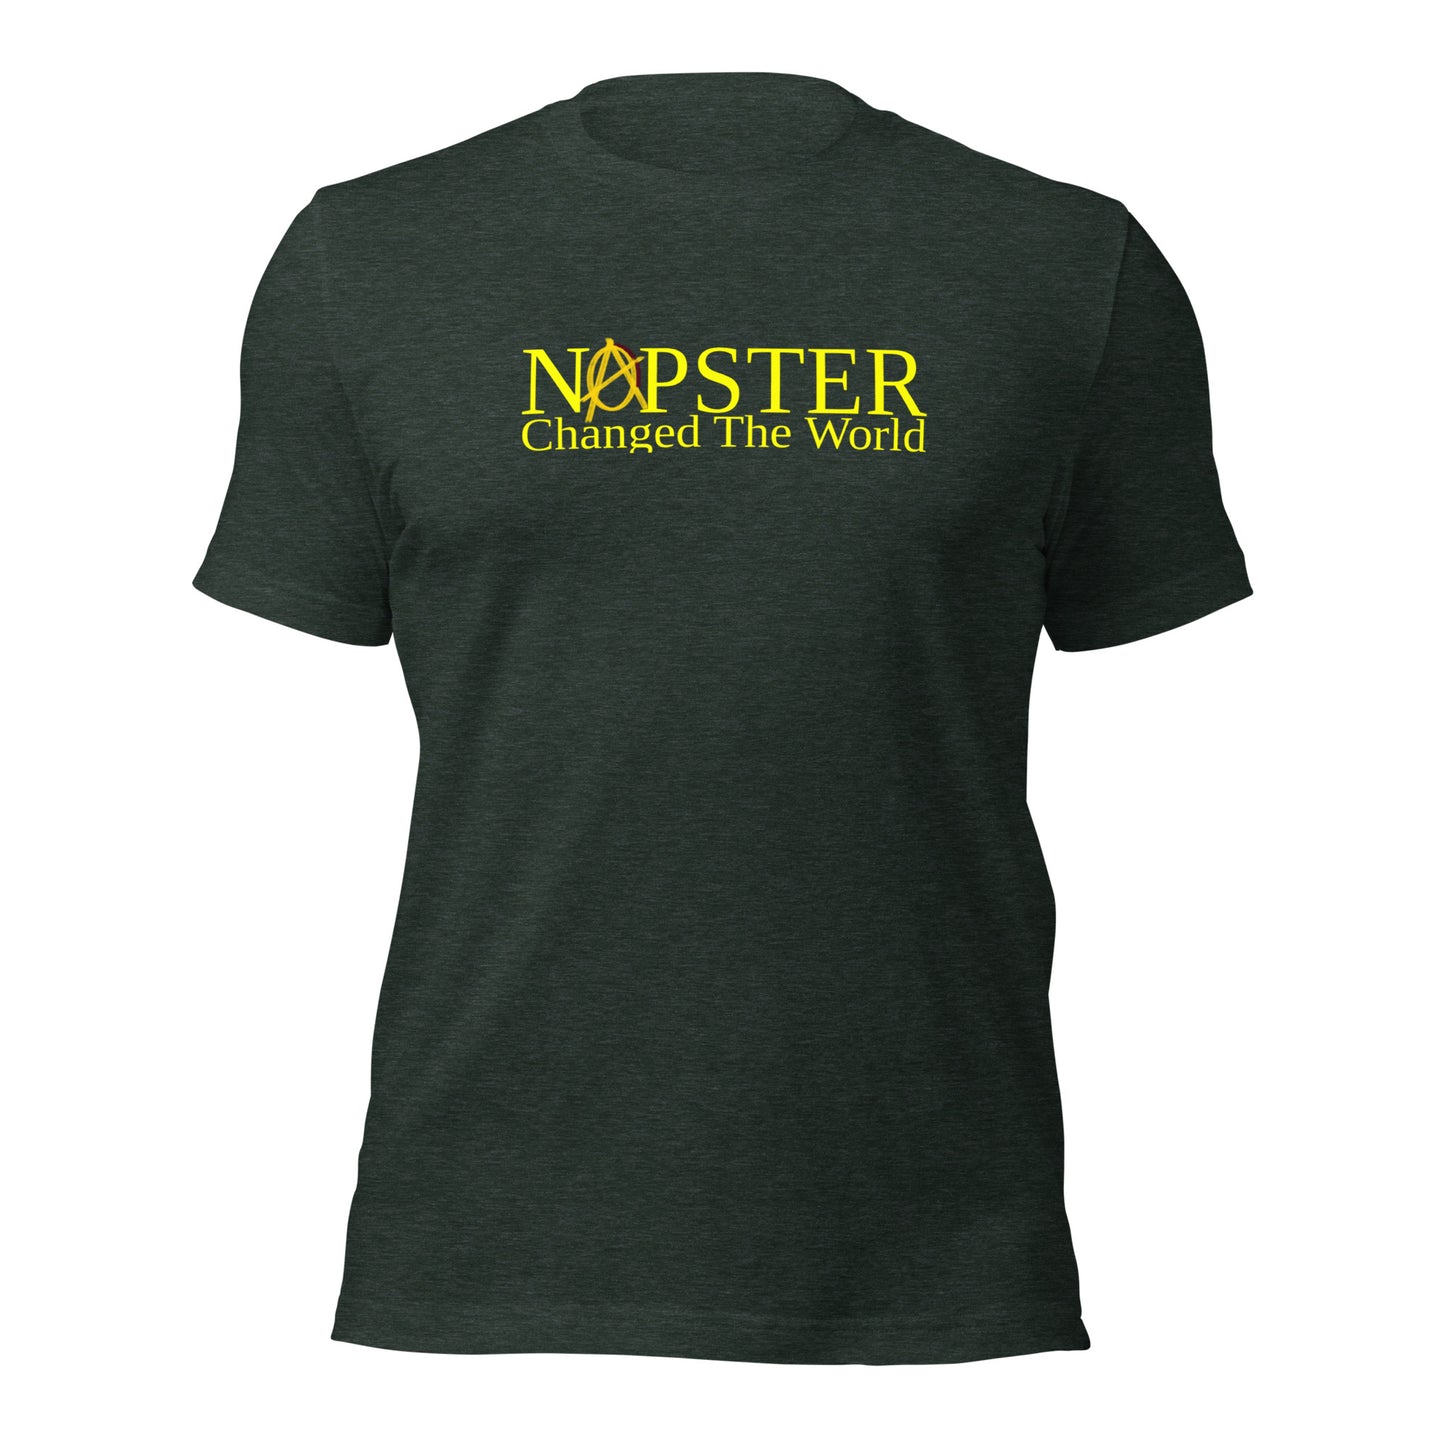 Anarchy Wear "NAPSTER changed the World" Unisex t-shirt